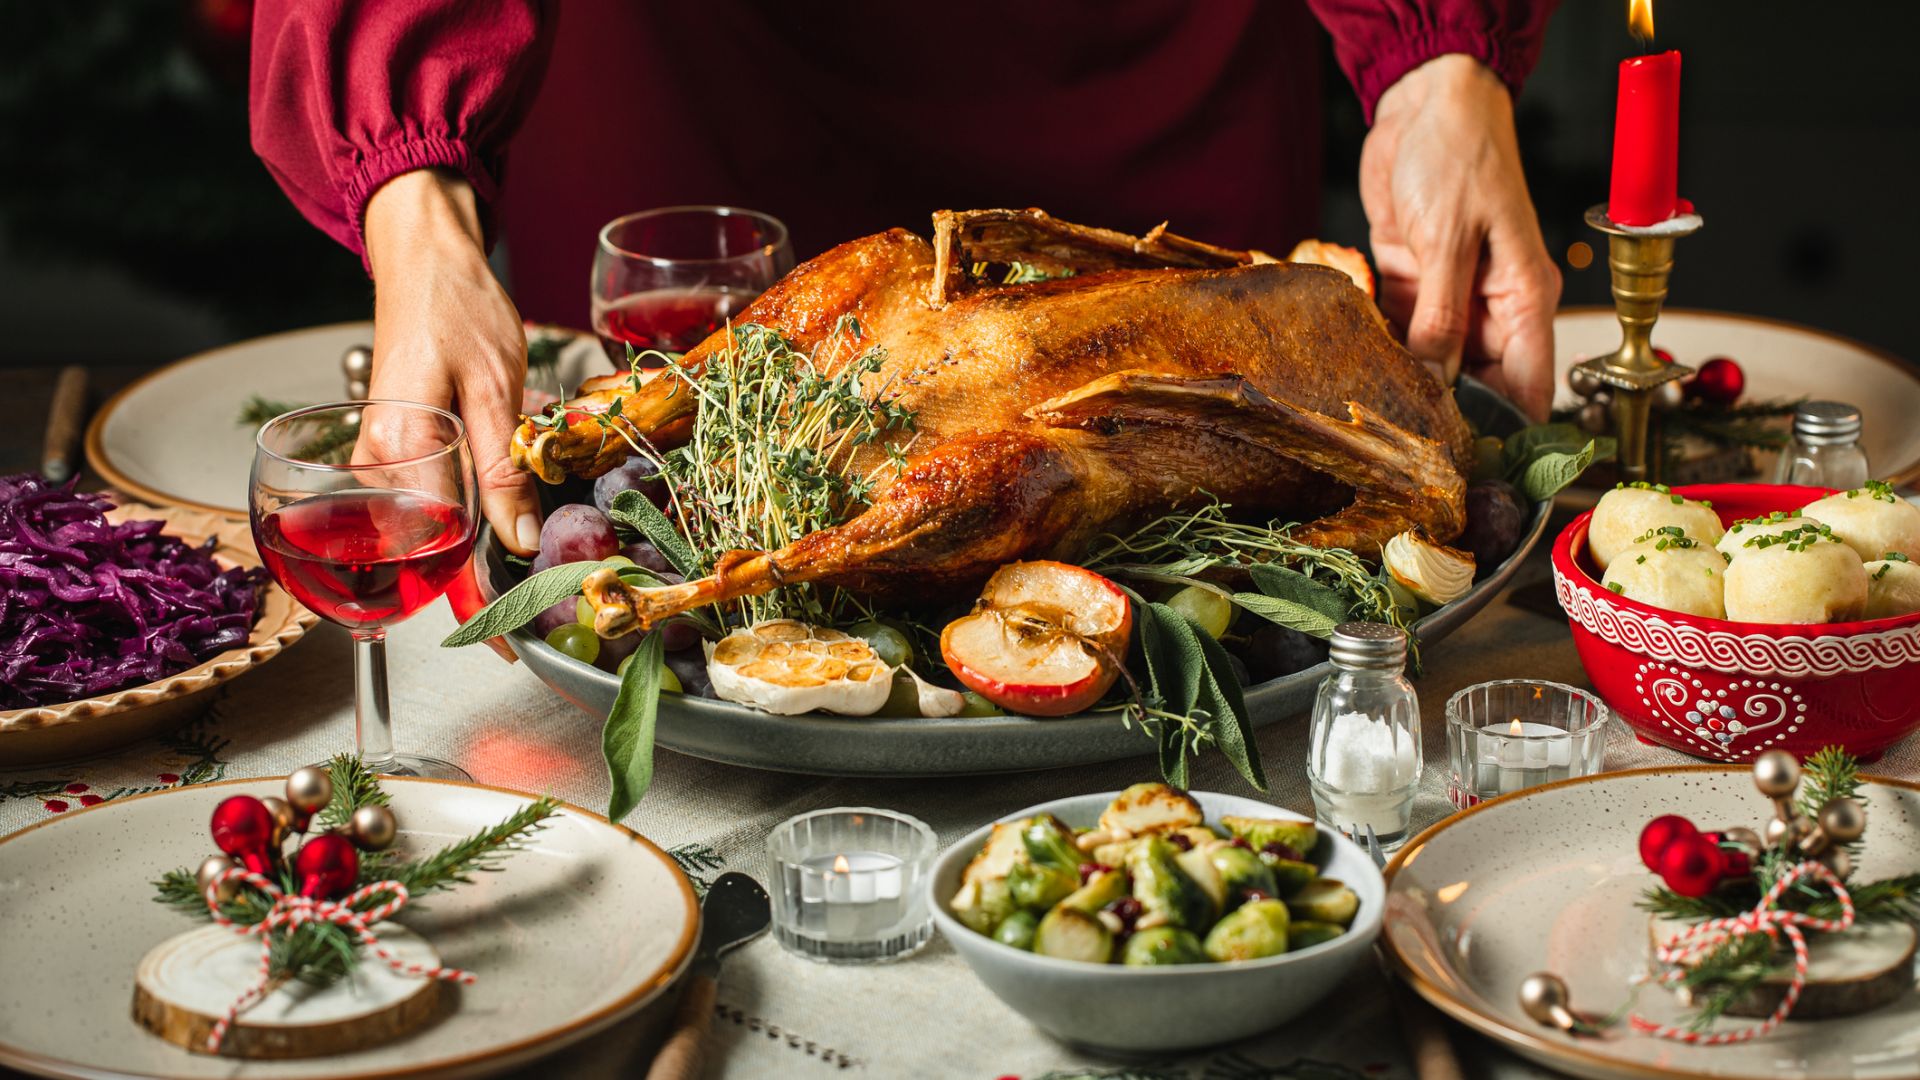 Woman sets table for Christmas dinner with roast goose